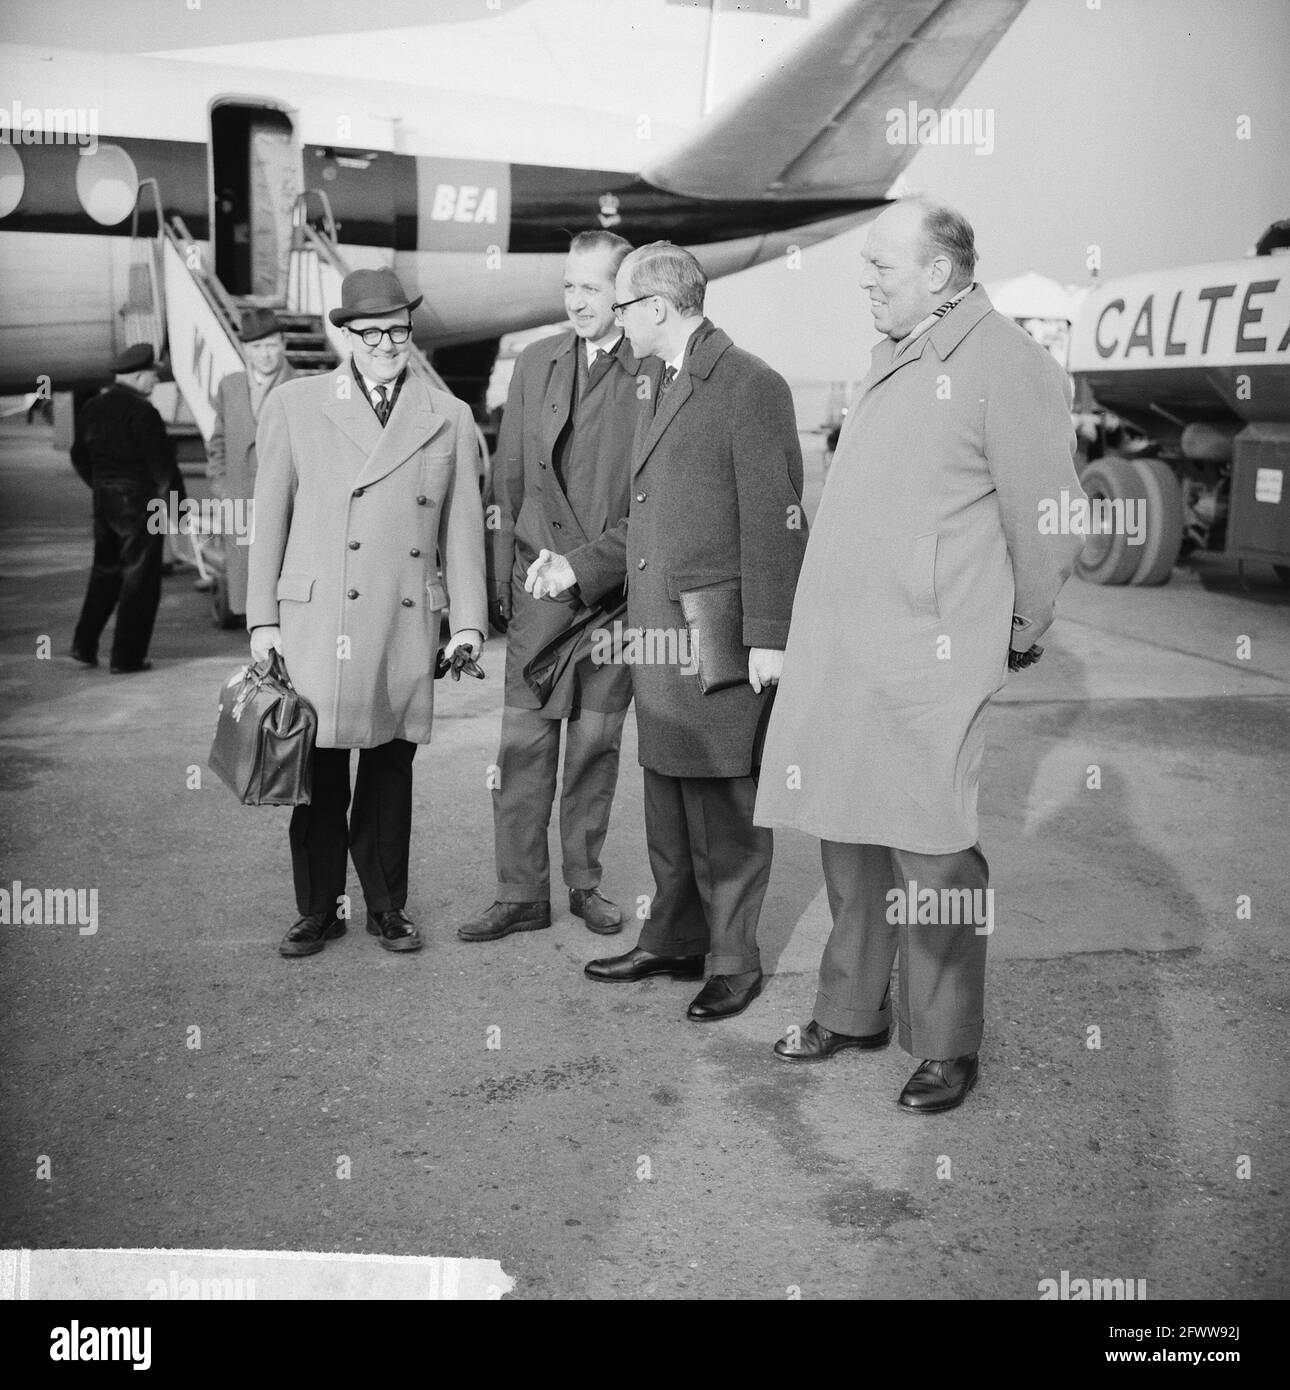 Order E. Alderse Baes, arrival of Mr. Mac Shaver at Schiphol Airport, January 10, 1964, arrivals, The Netherlands, 20th century press agency photo, news to remember, documentary, historic photography 1945-1990, visual stories, human history of the Twentieth Century, capturing moments in time Stock Photo